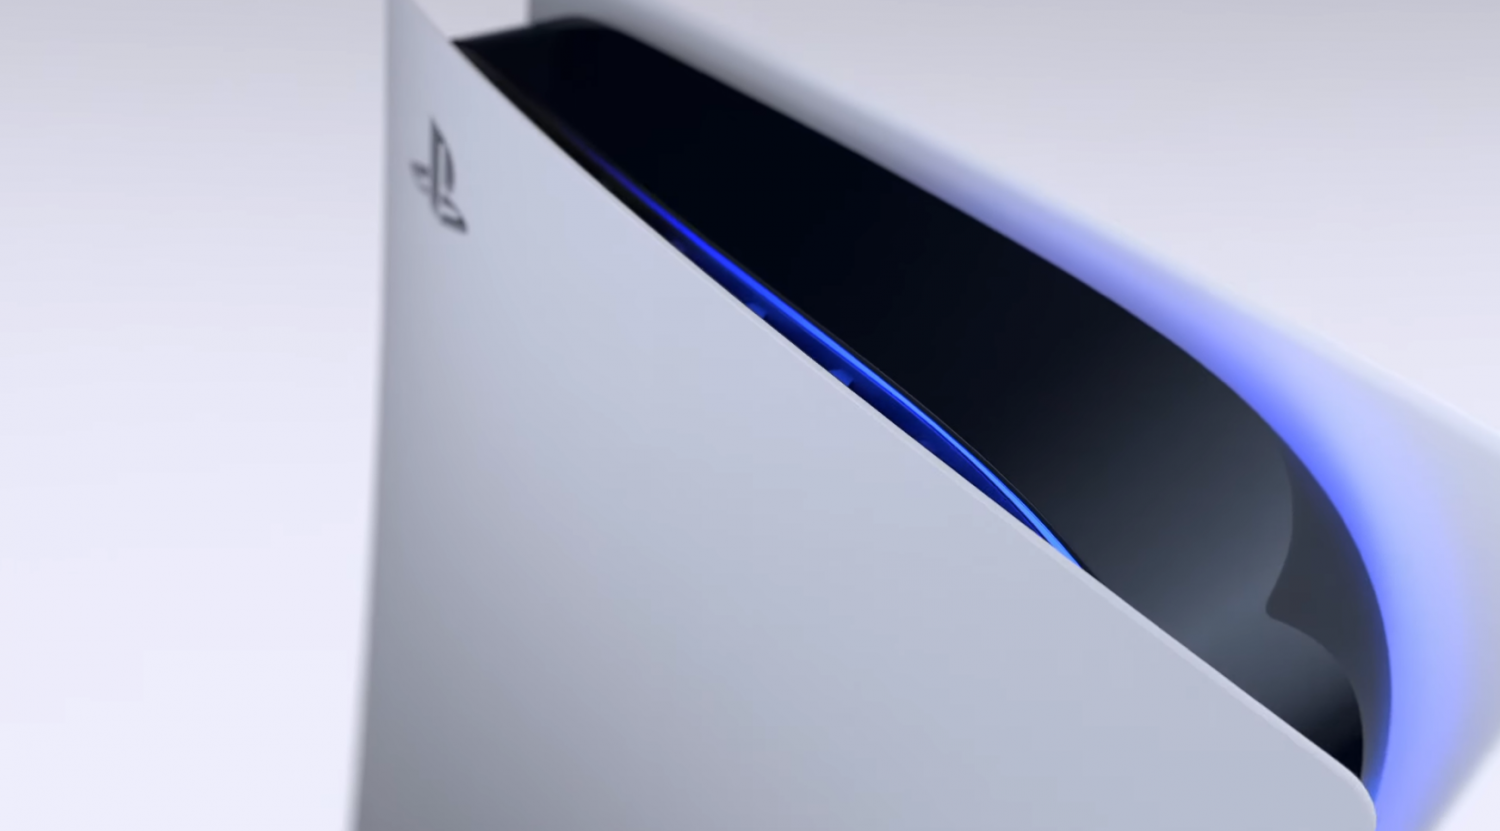 playstation 5 cost